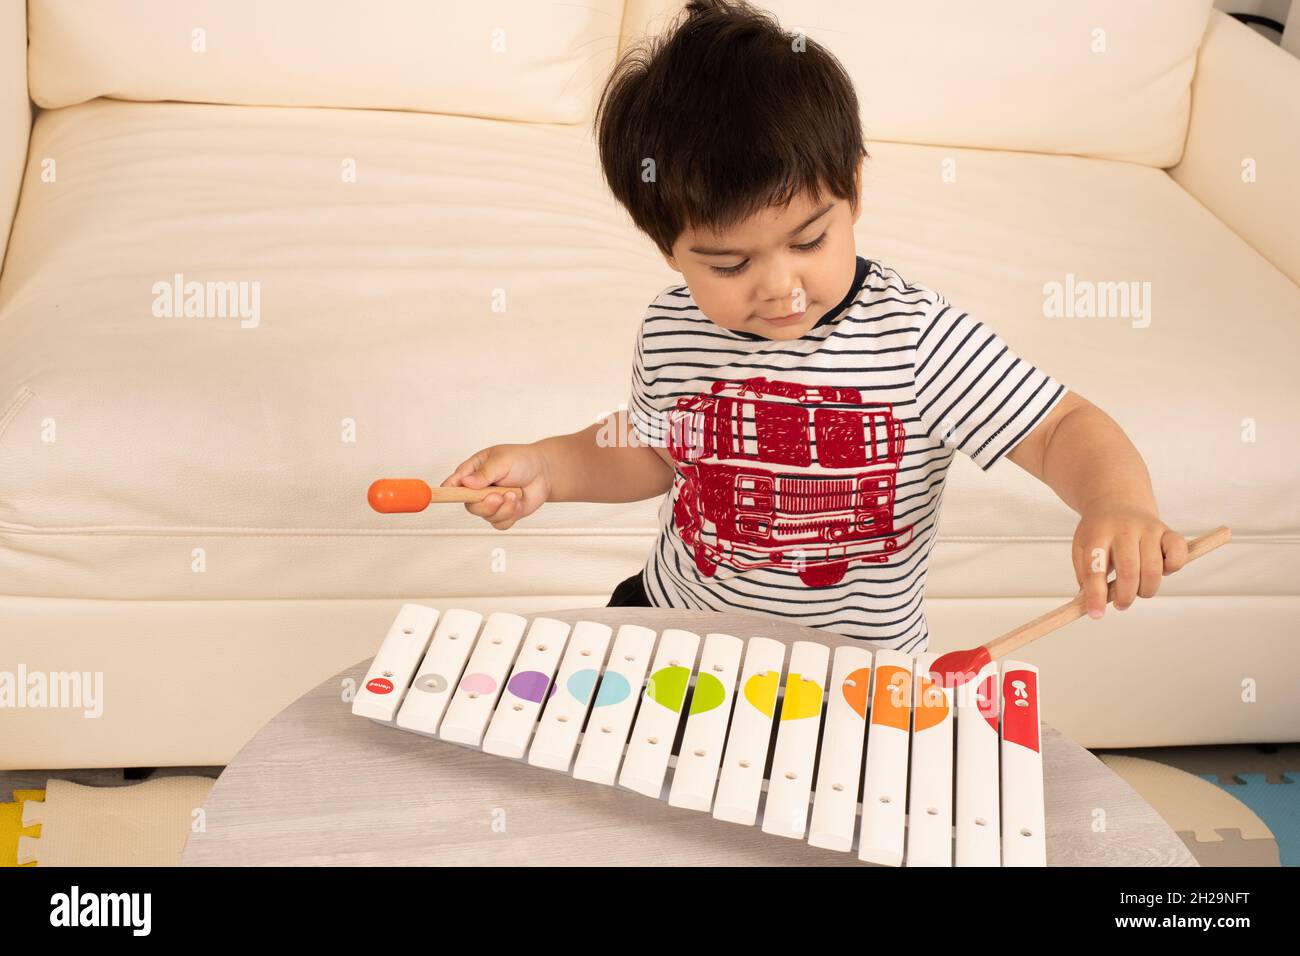 2 year old toddler boy playing wooden xylophone with mallets Stock Photo